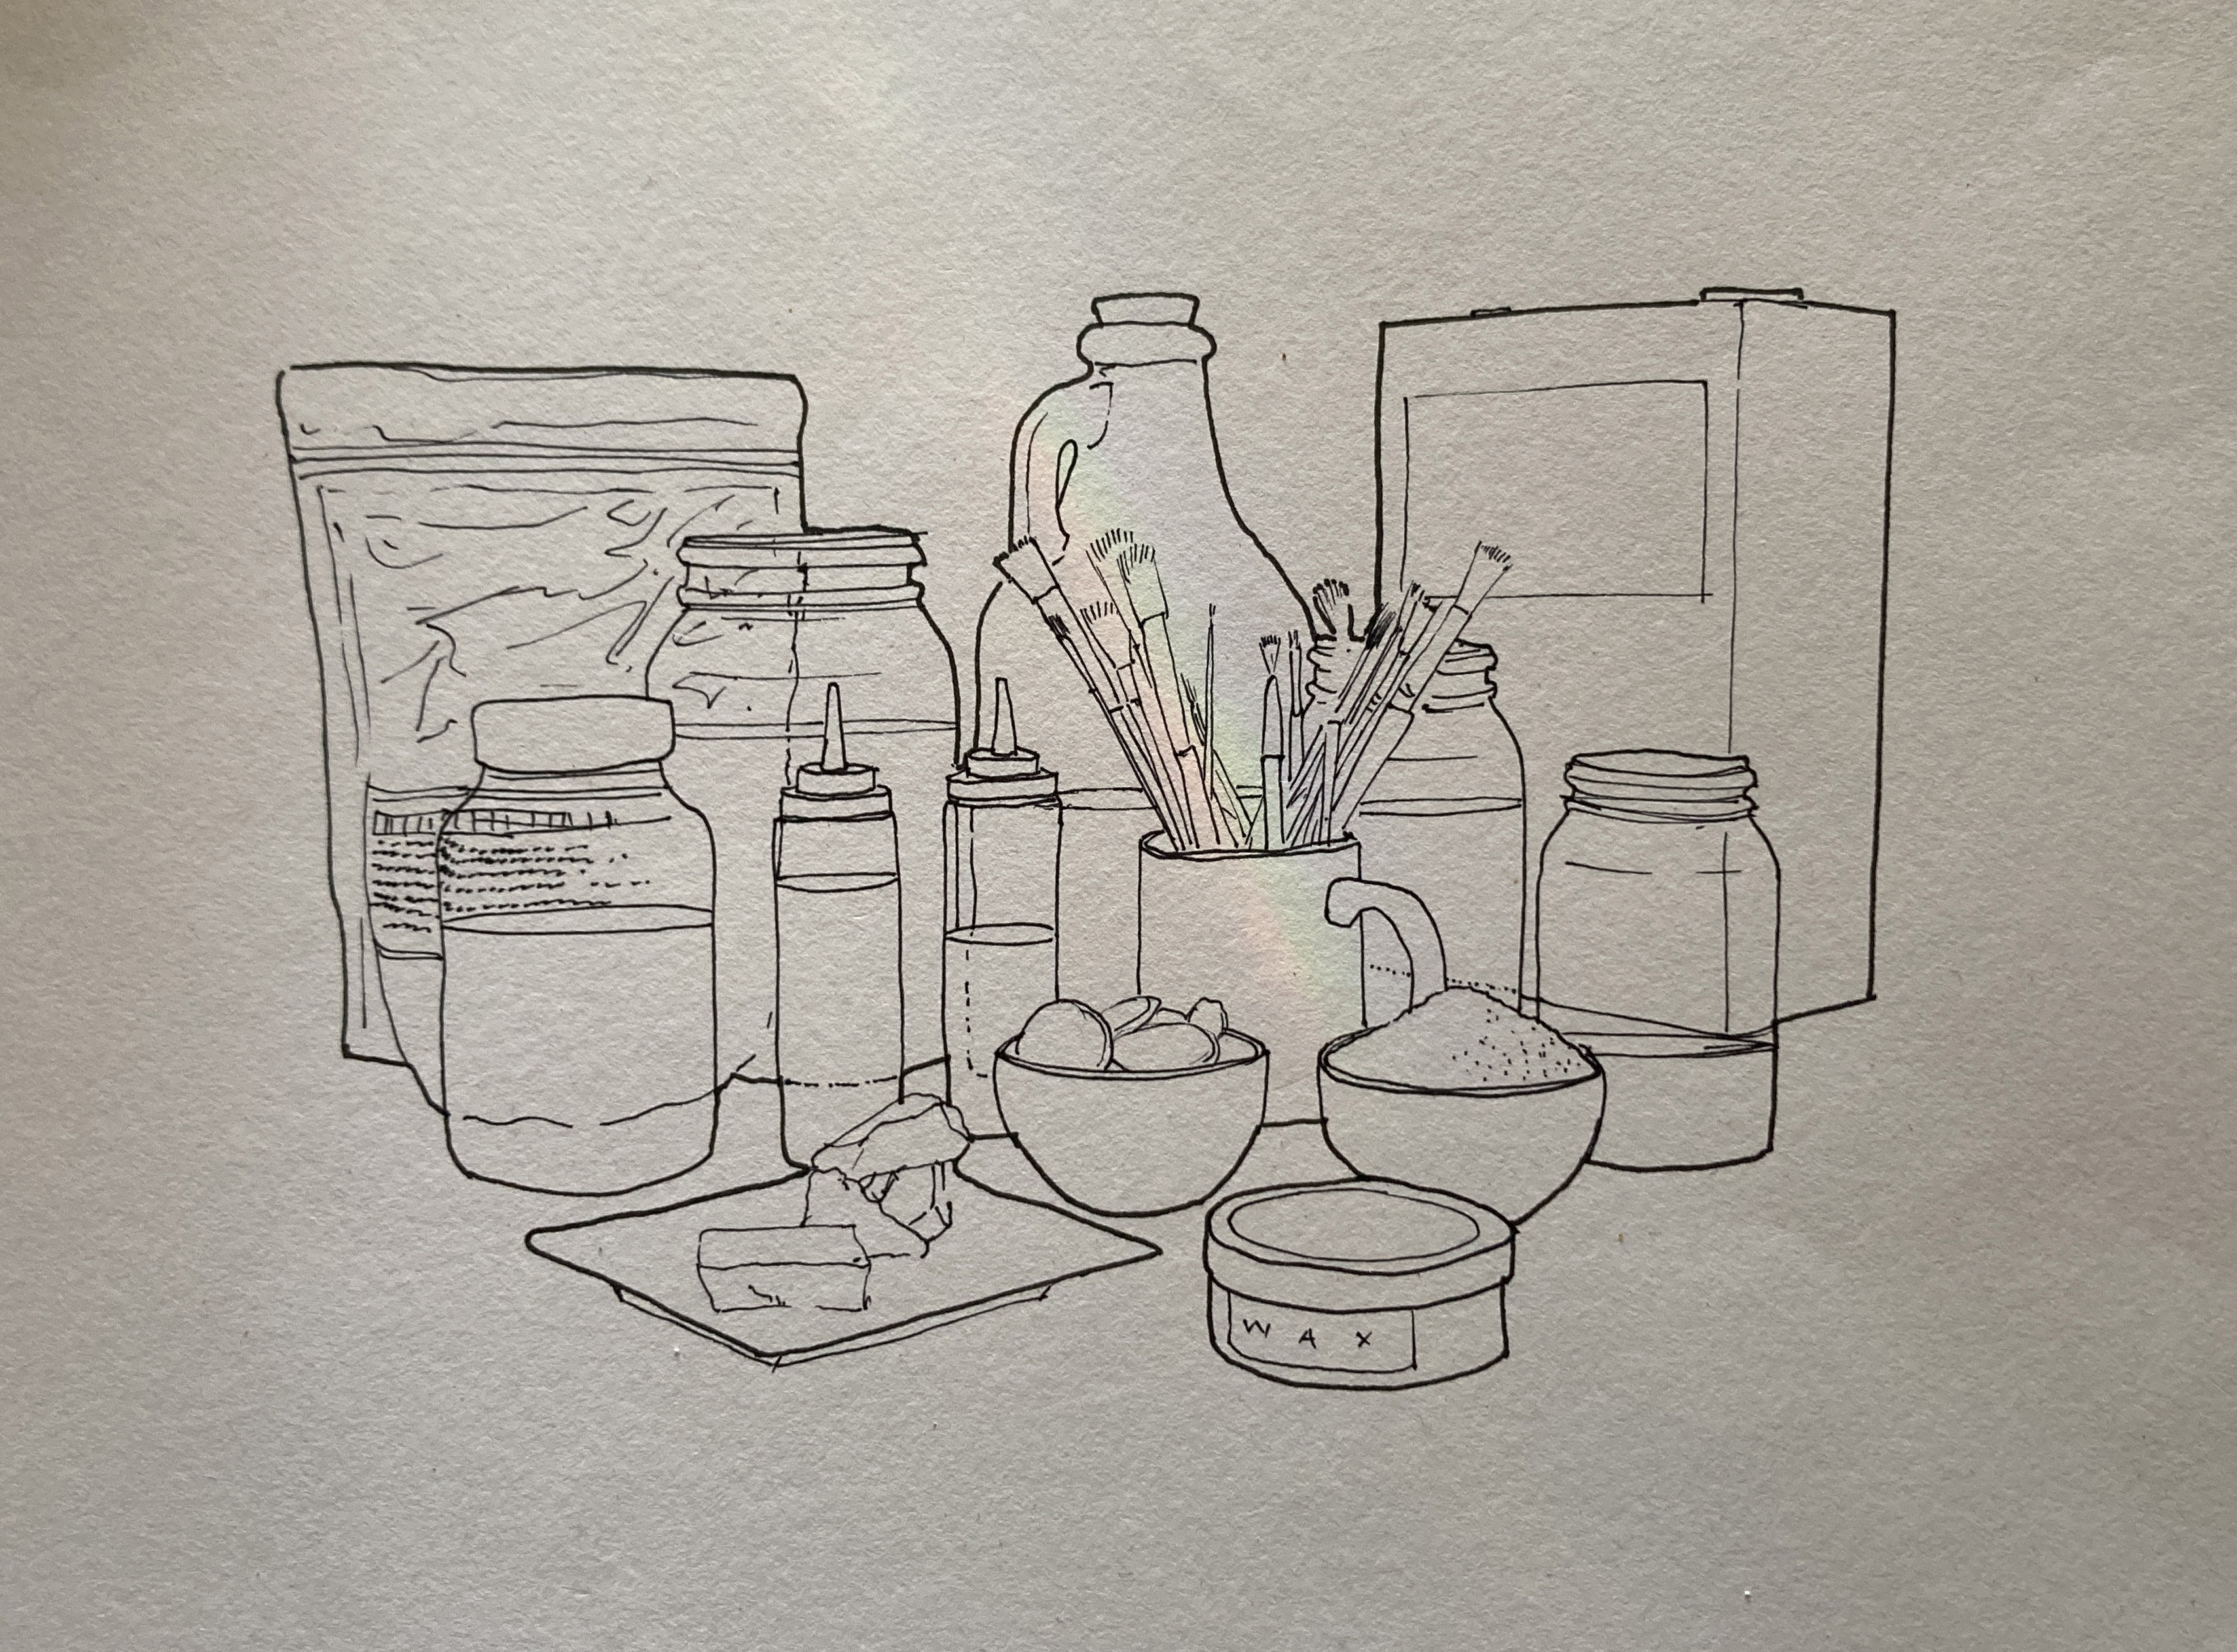 Lineart of the image of bottles, jars and finishing implements photographed on paper.